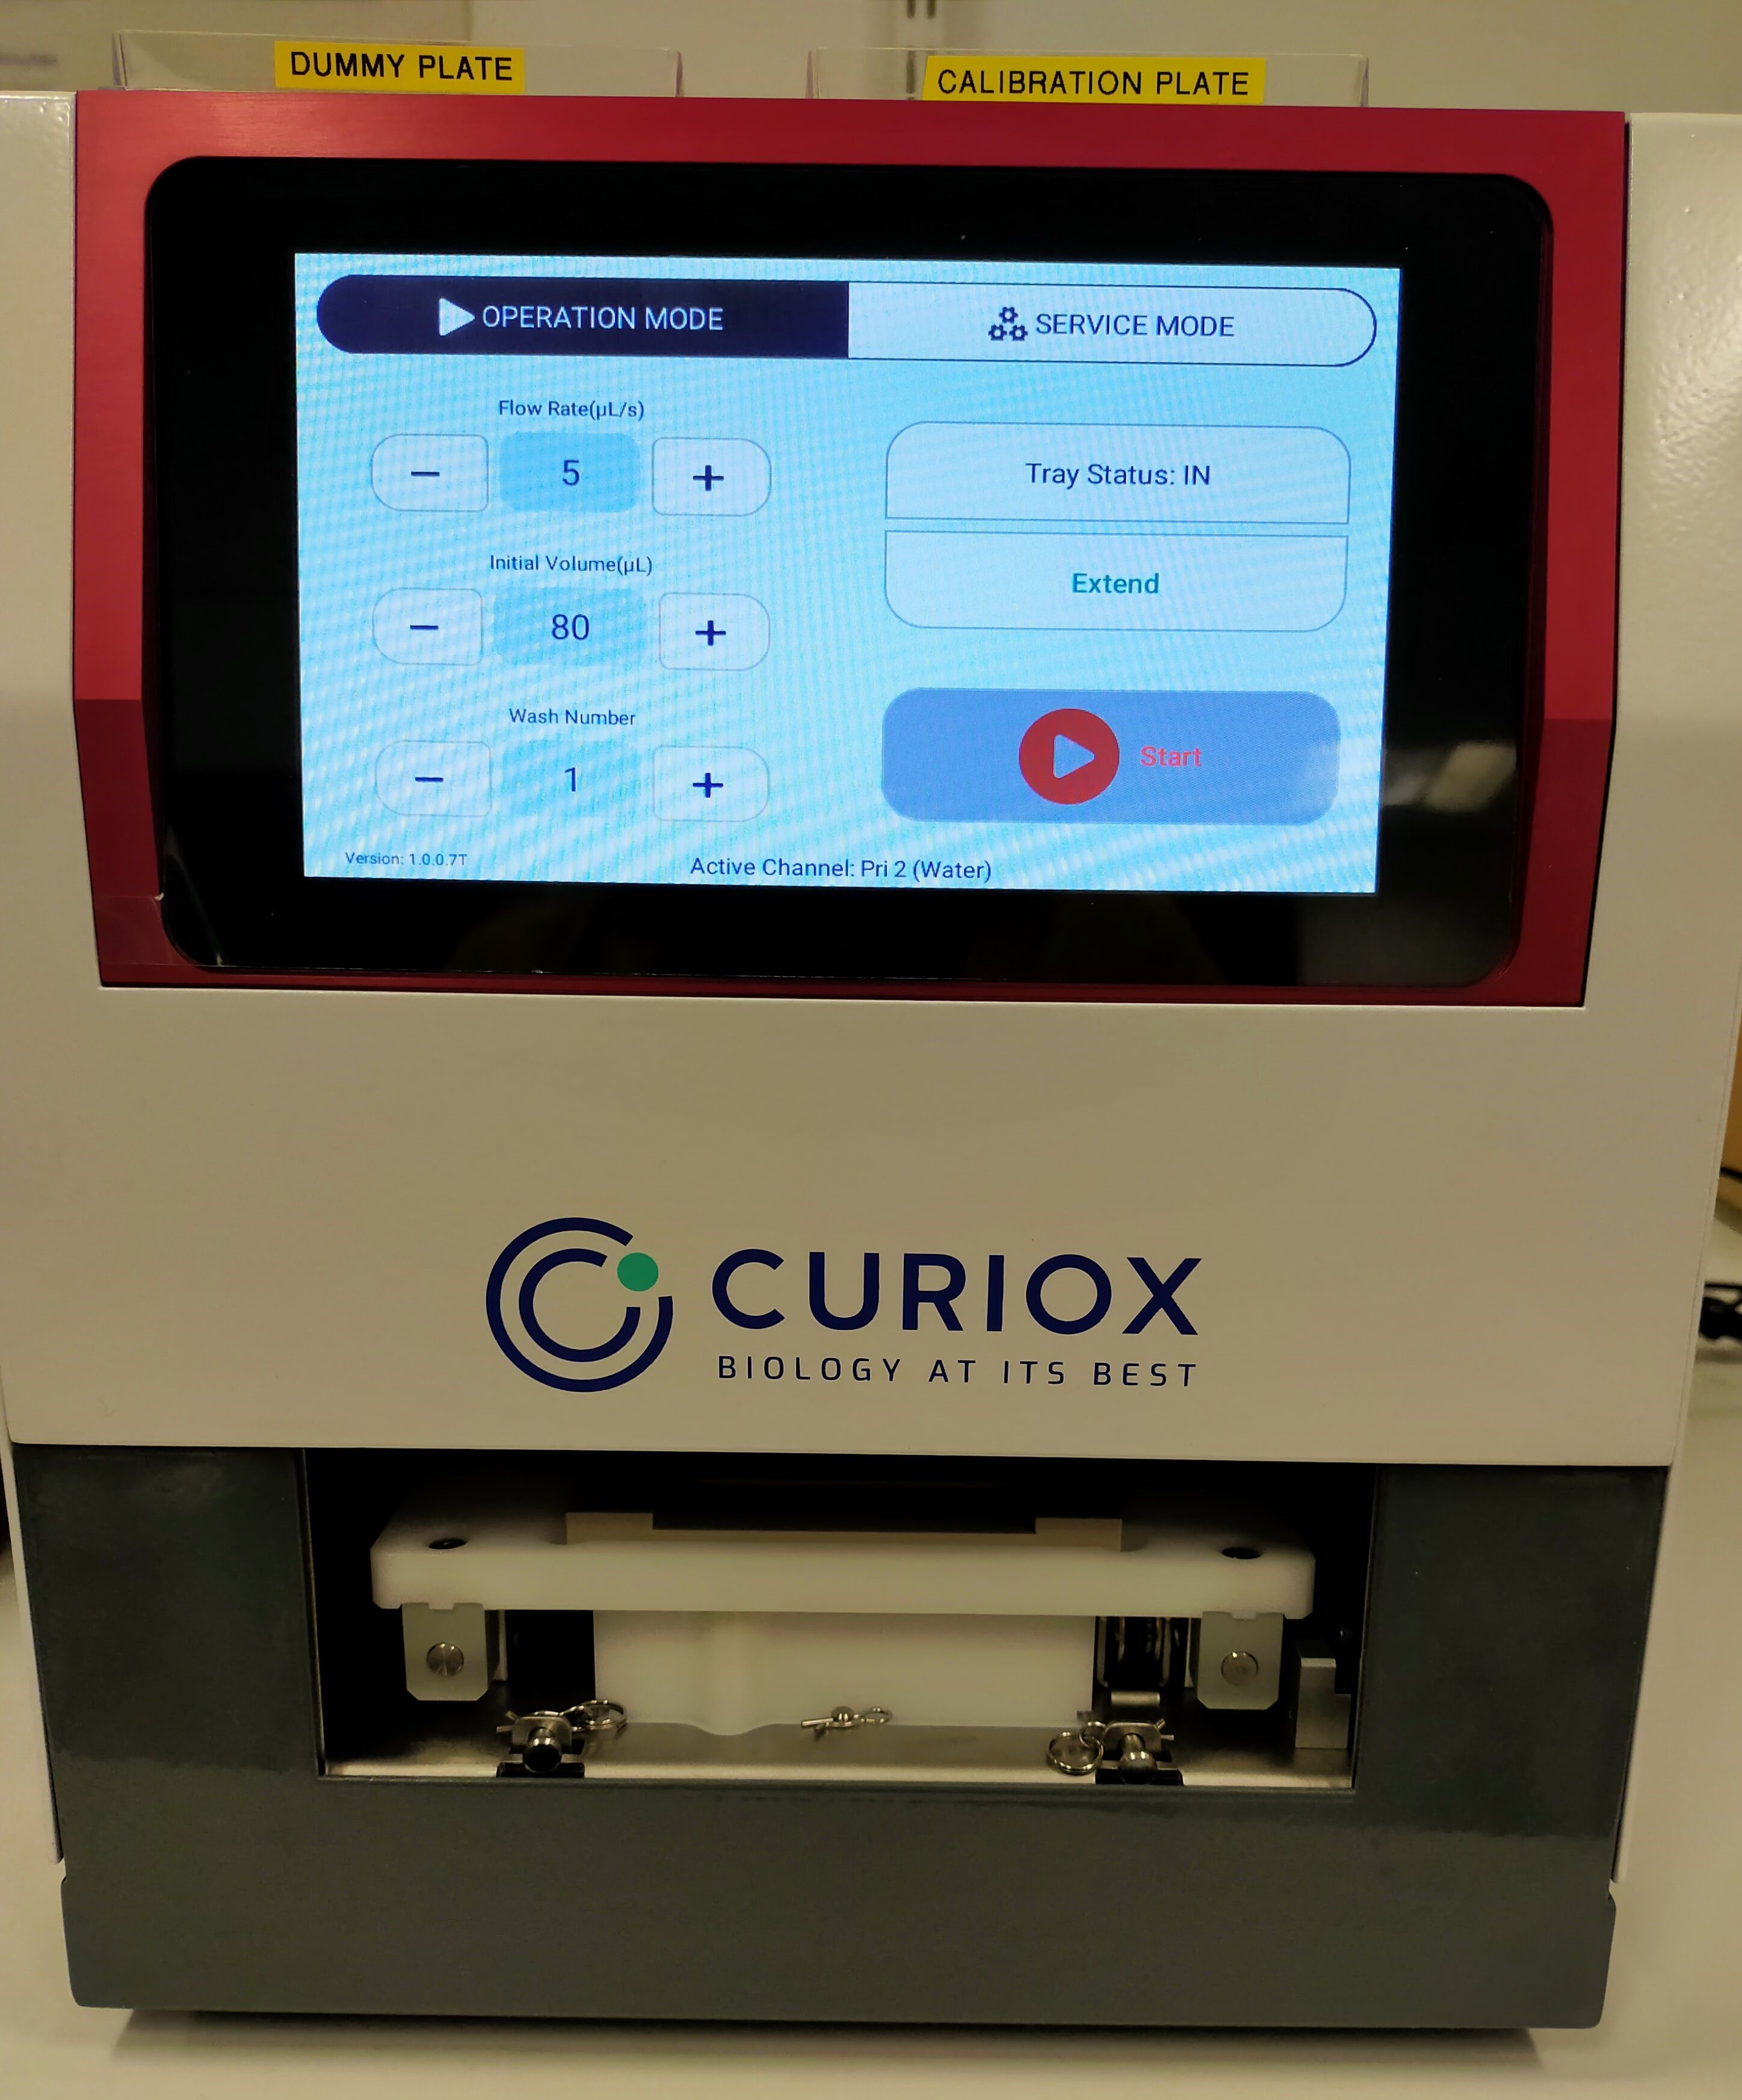 The Curiox HT2000 instrument